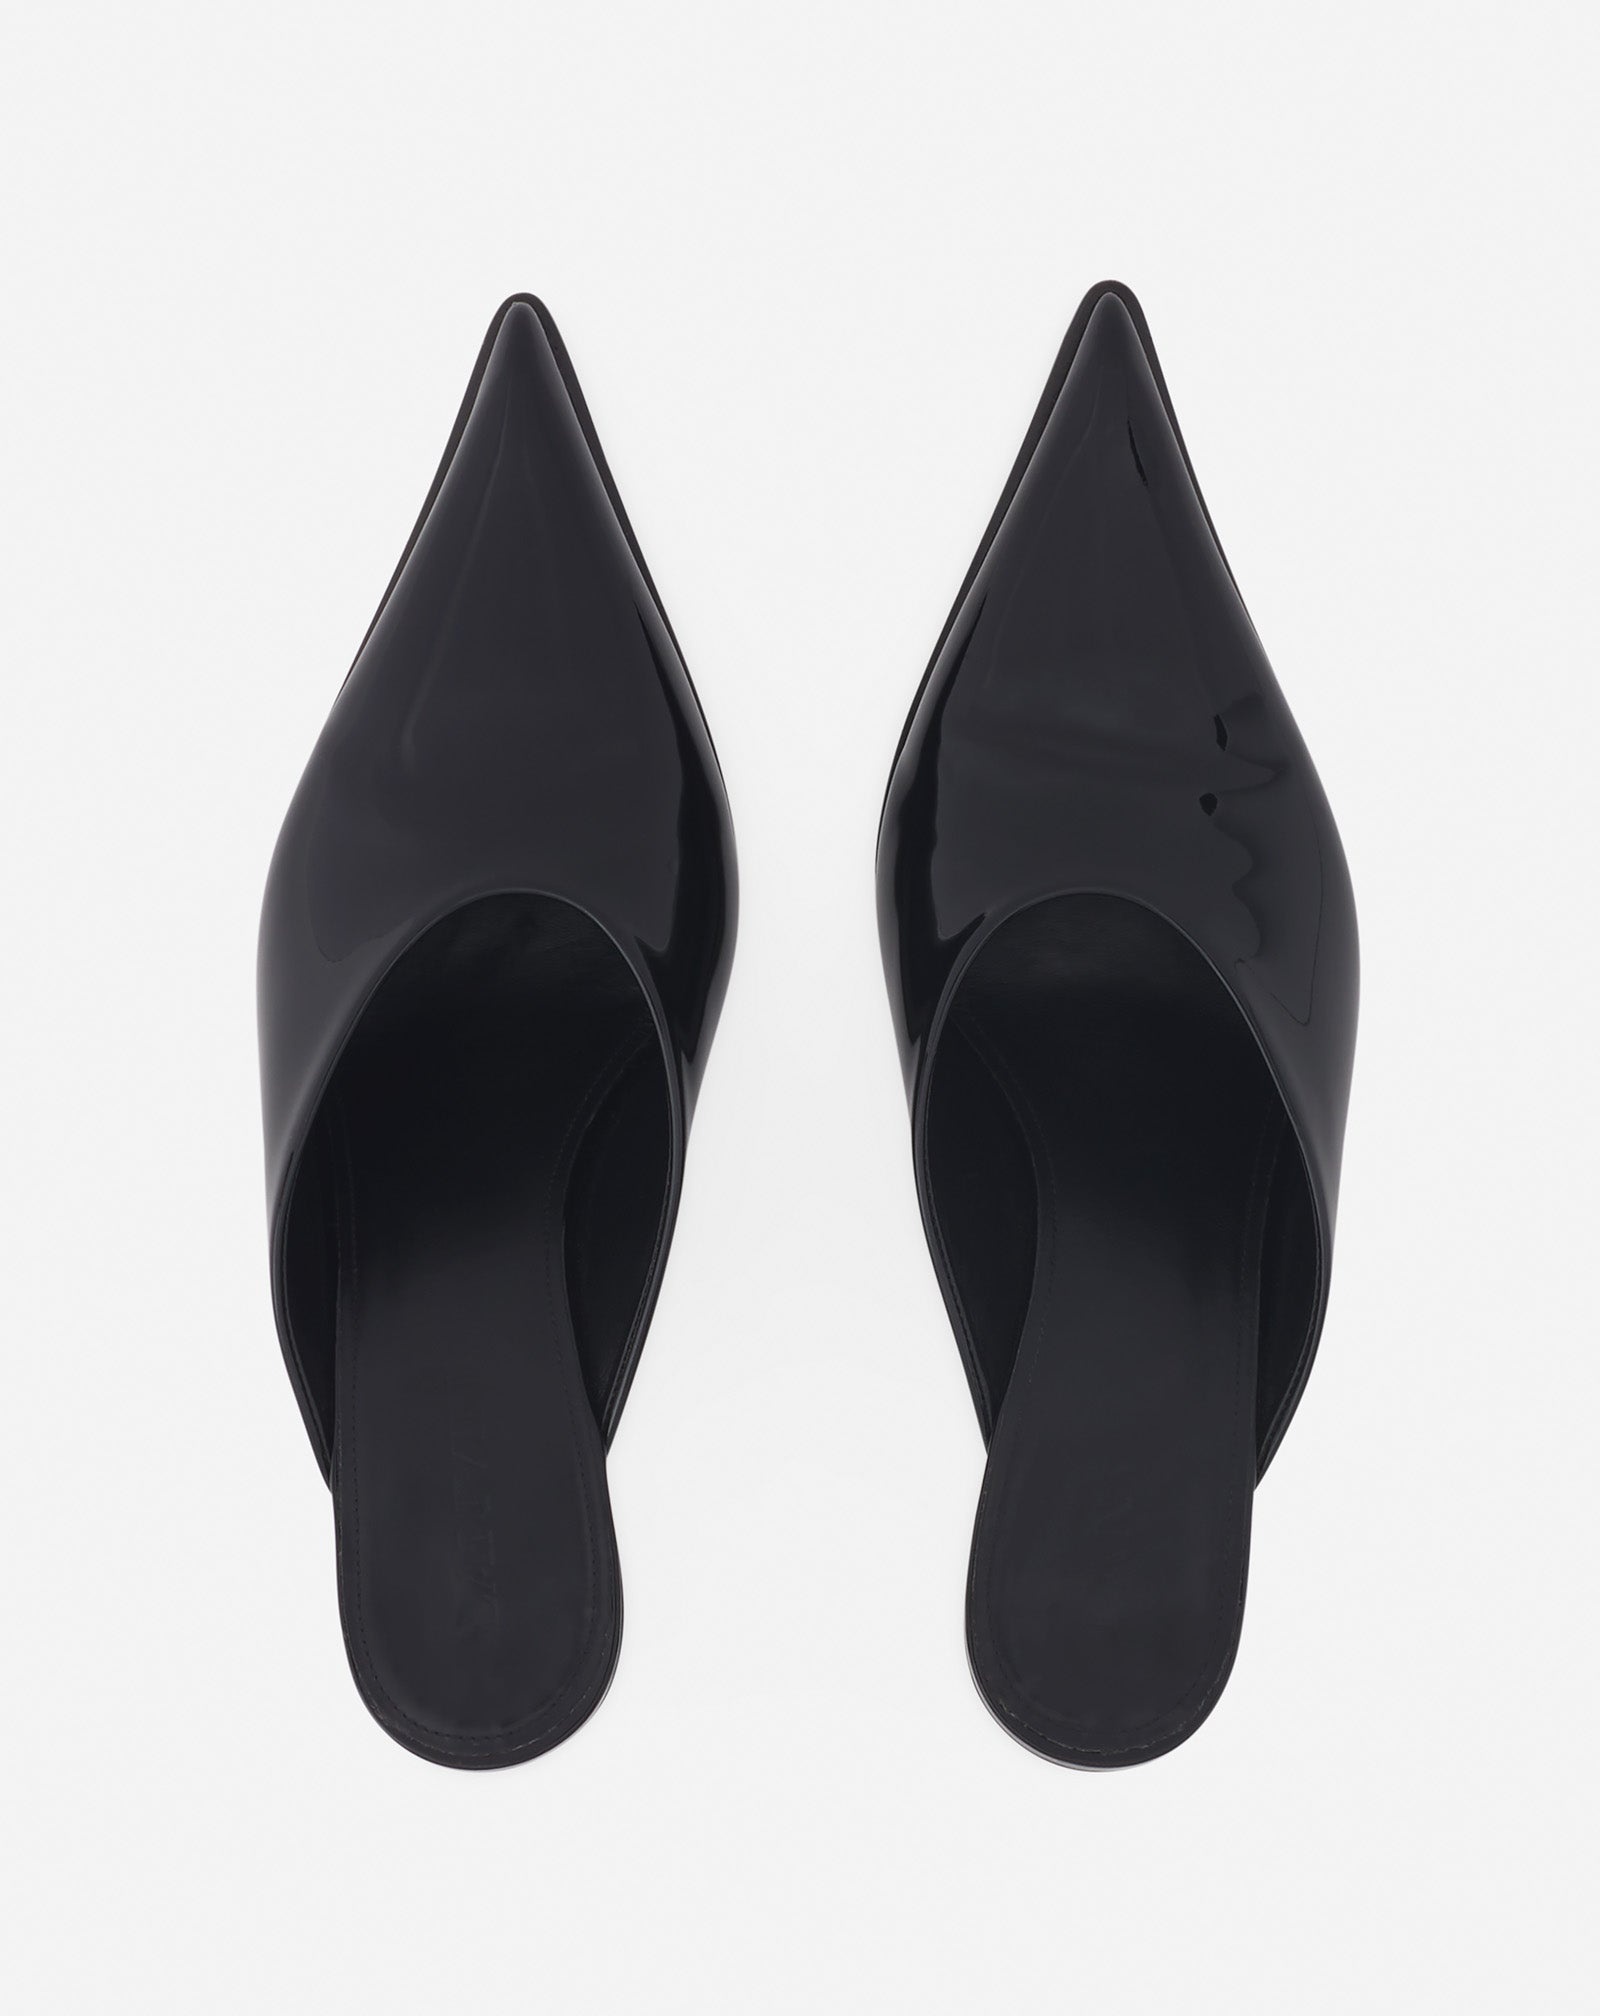 PATENT LEATHER HEELED MULES - 3